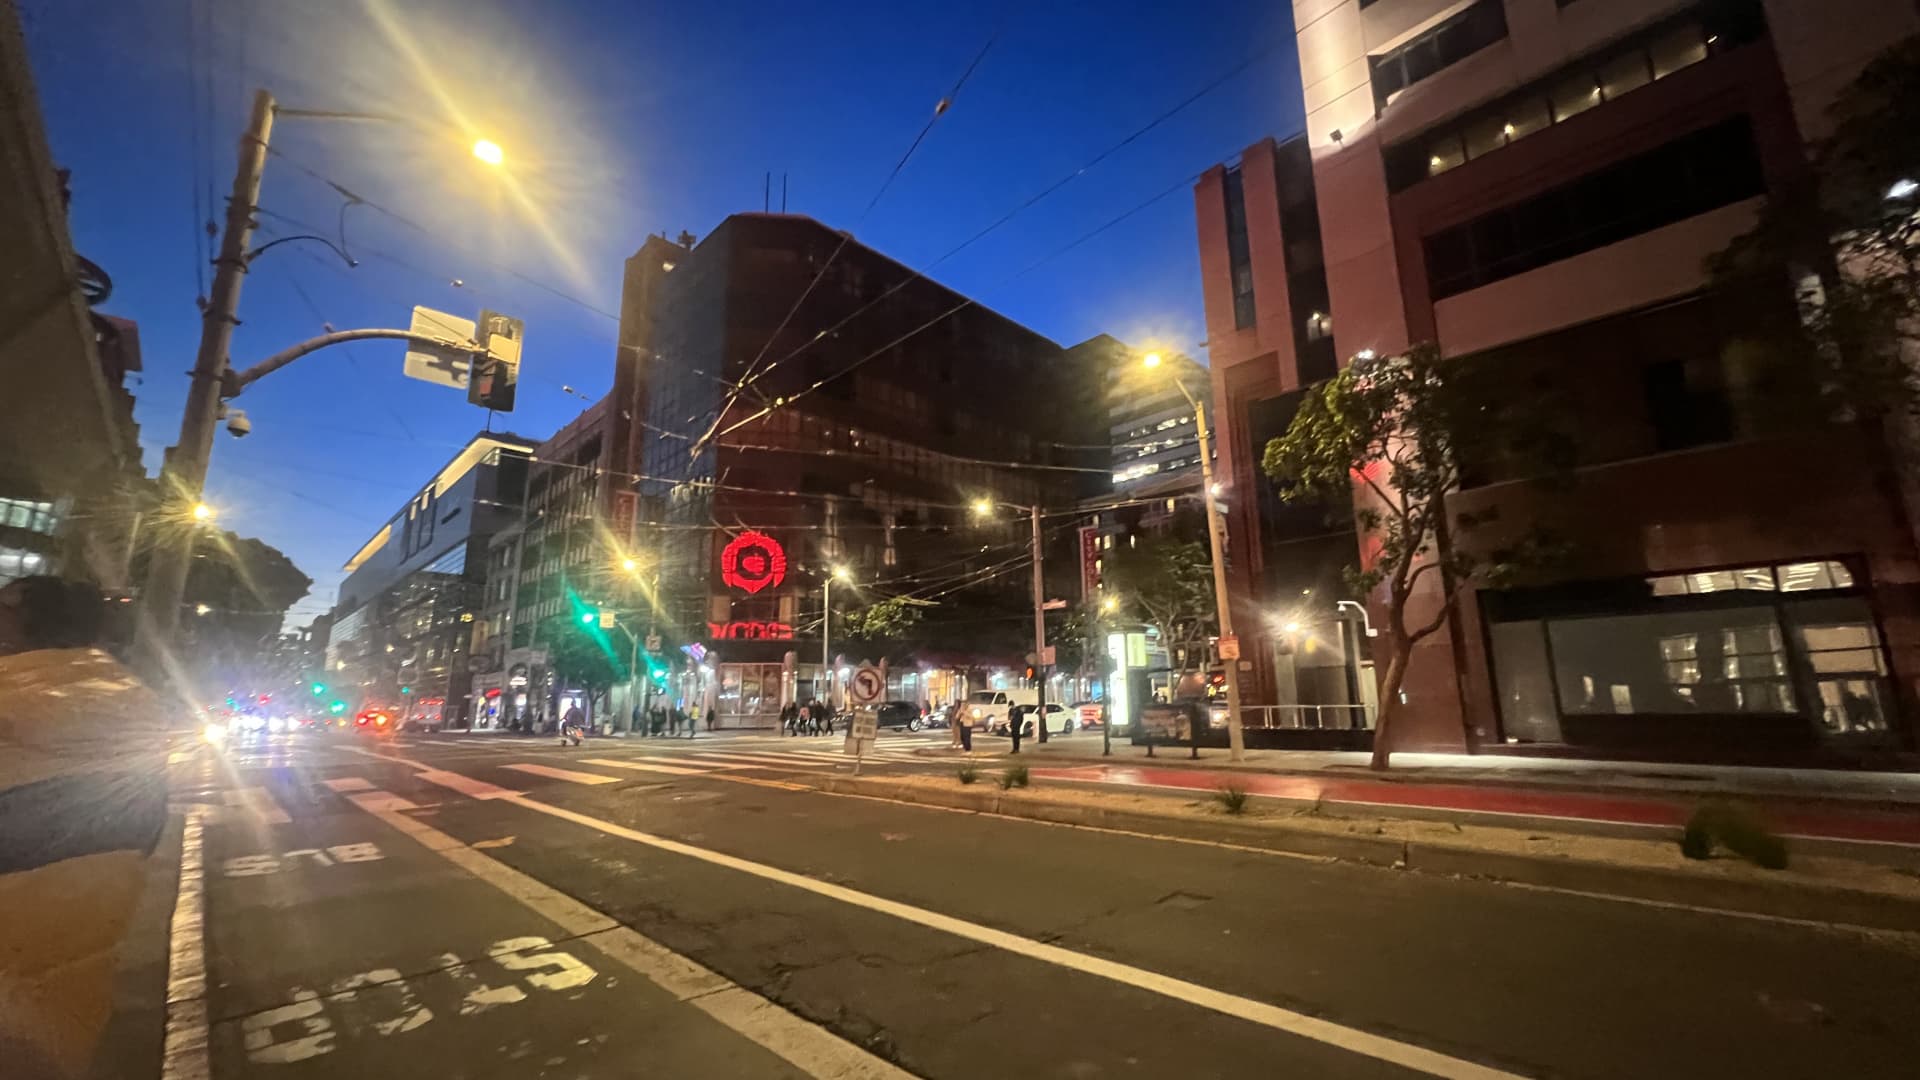 The Target sign from its Mission Street store in San Francisco's Union Square glows on a building across the street, November 2023.